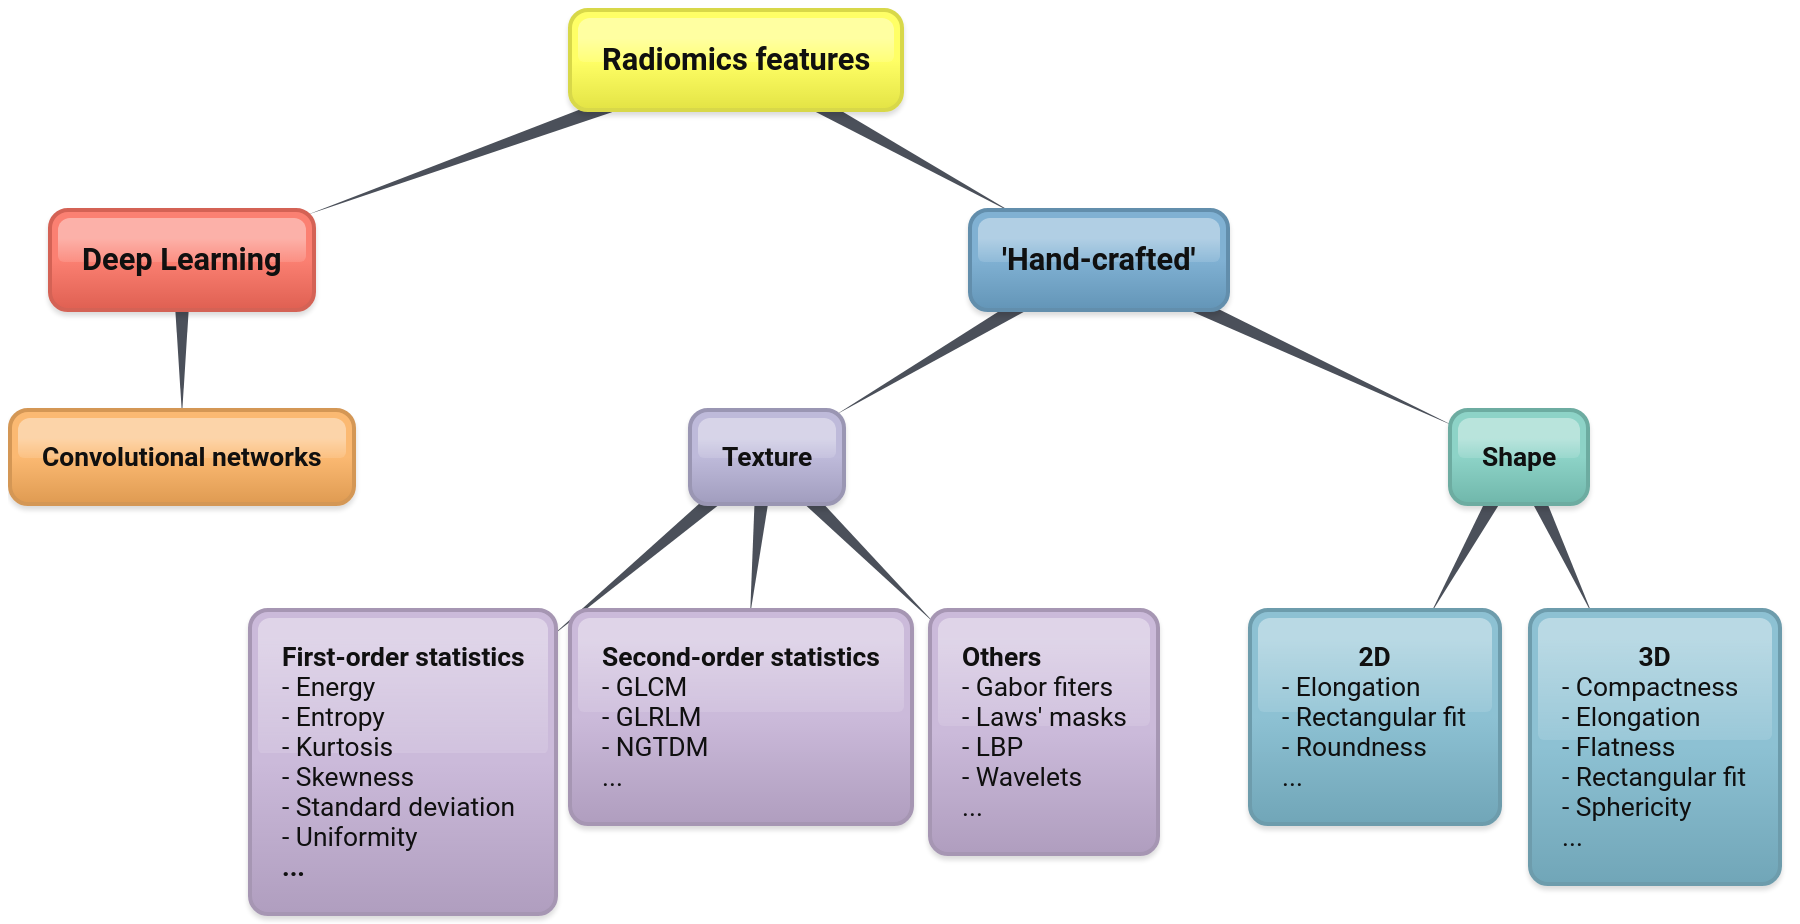 A taxonomy of radiomics features